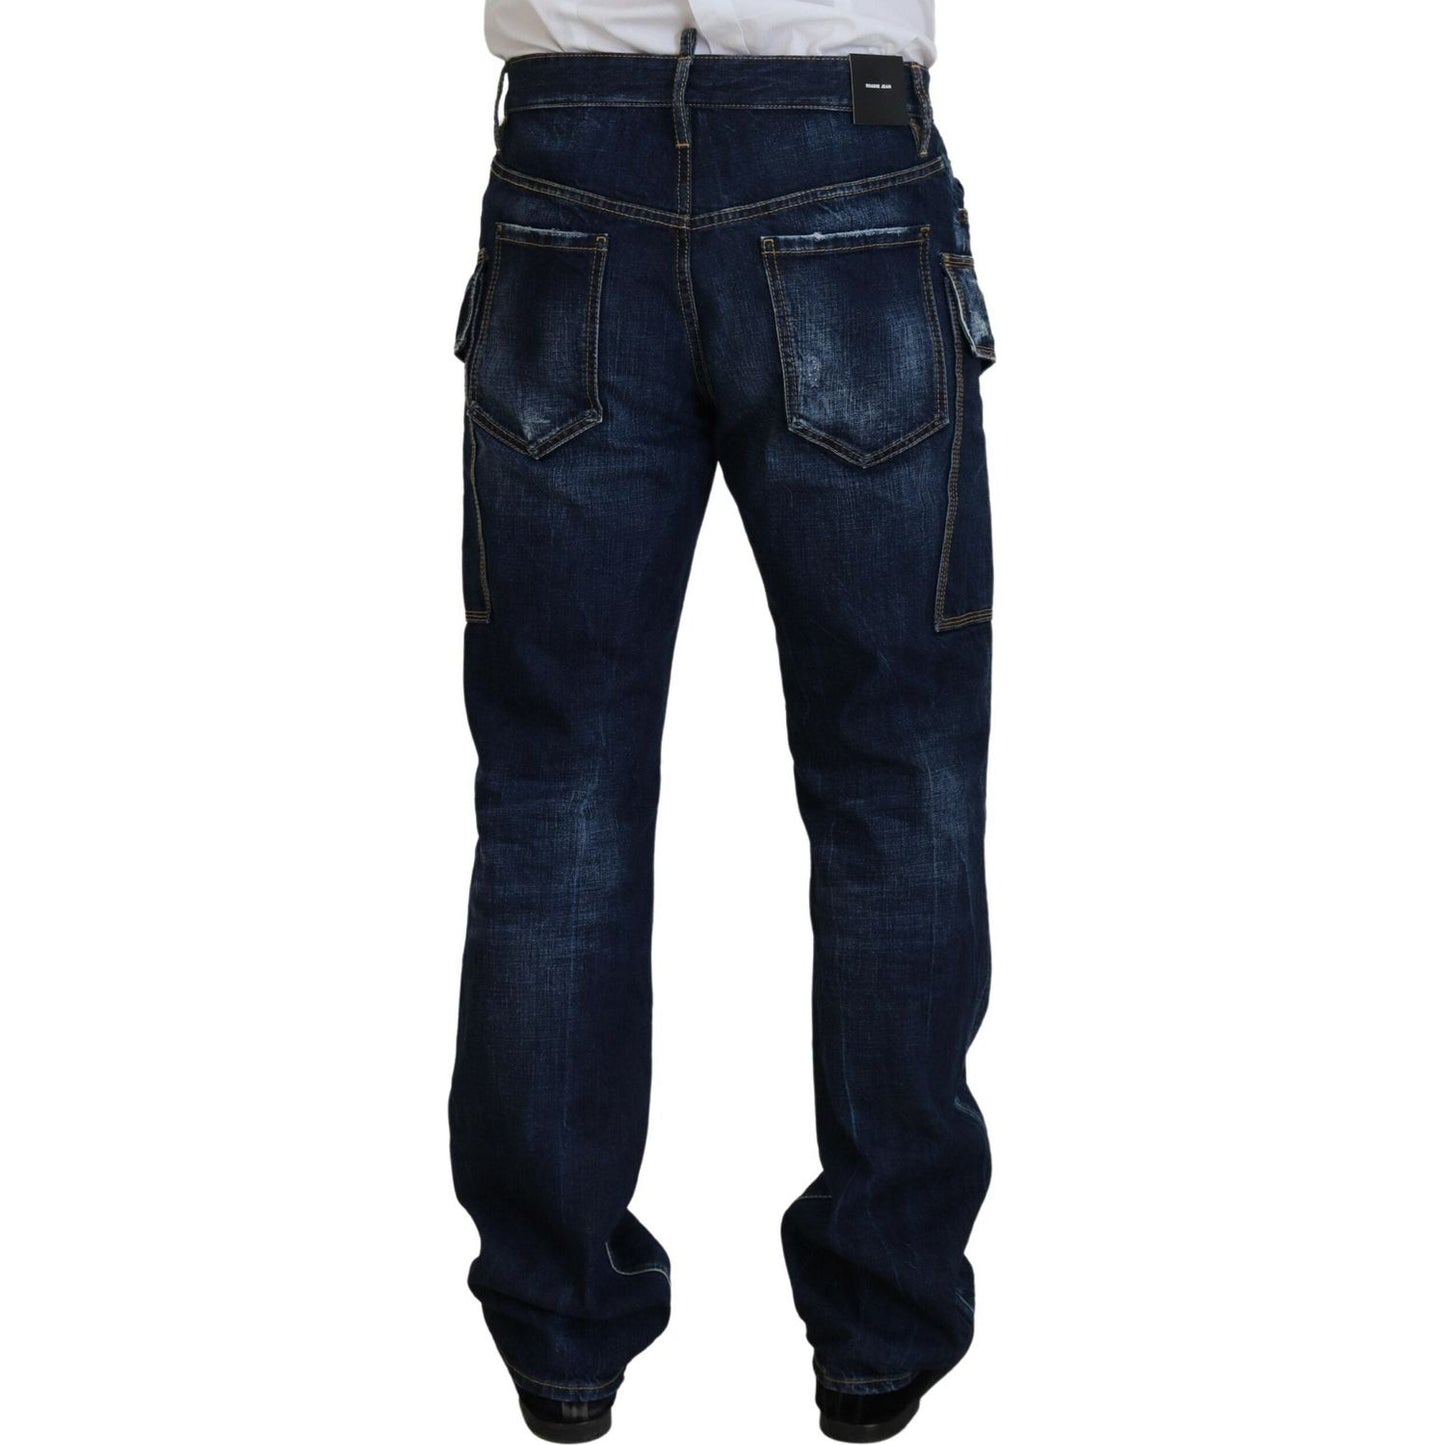 Dsquared² Blue Washed Cotton Cargo Casual Men Denim Jeans blue-washed-cotton-cargo-casual-men-denim-jeans